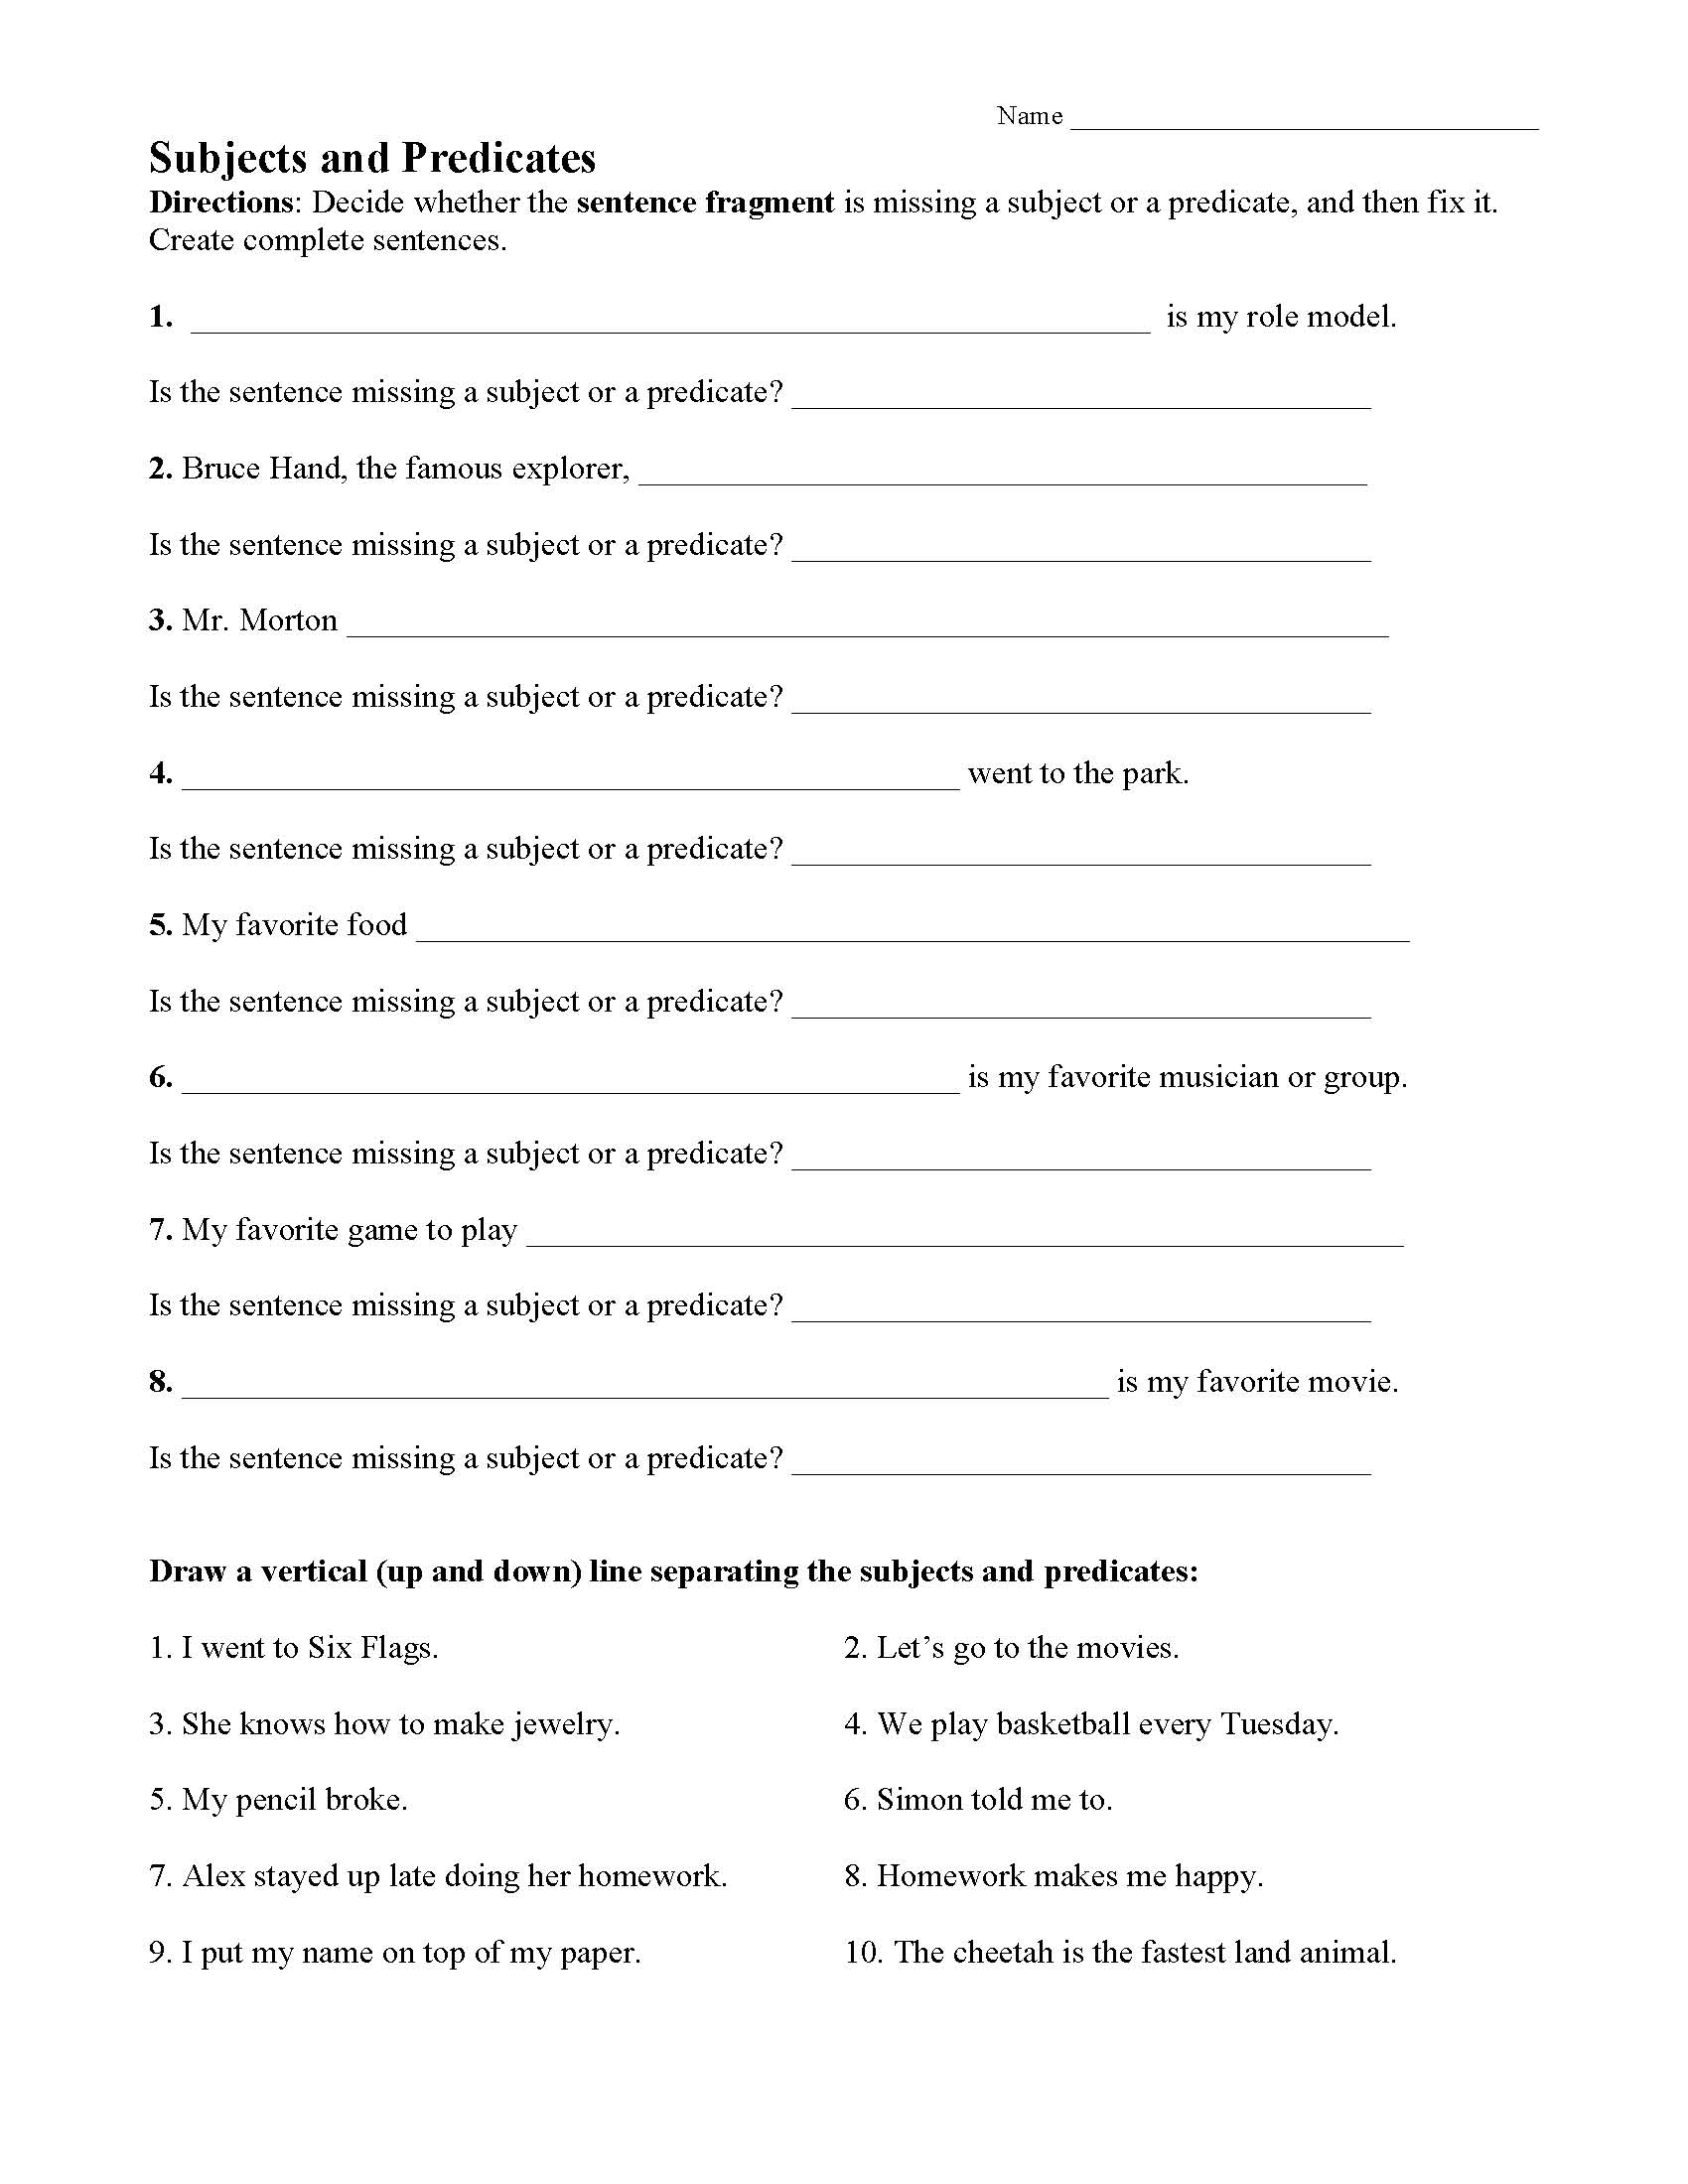 subjects-and-predicates-worksheet-1-sentence-structure-activity